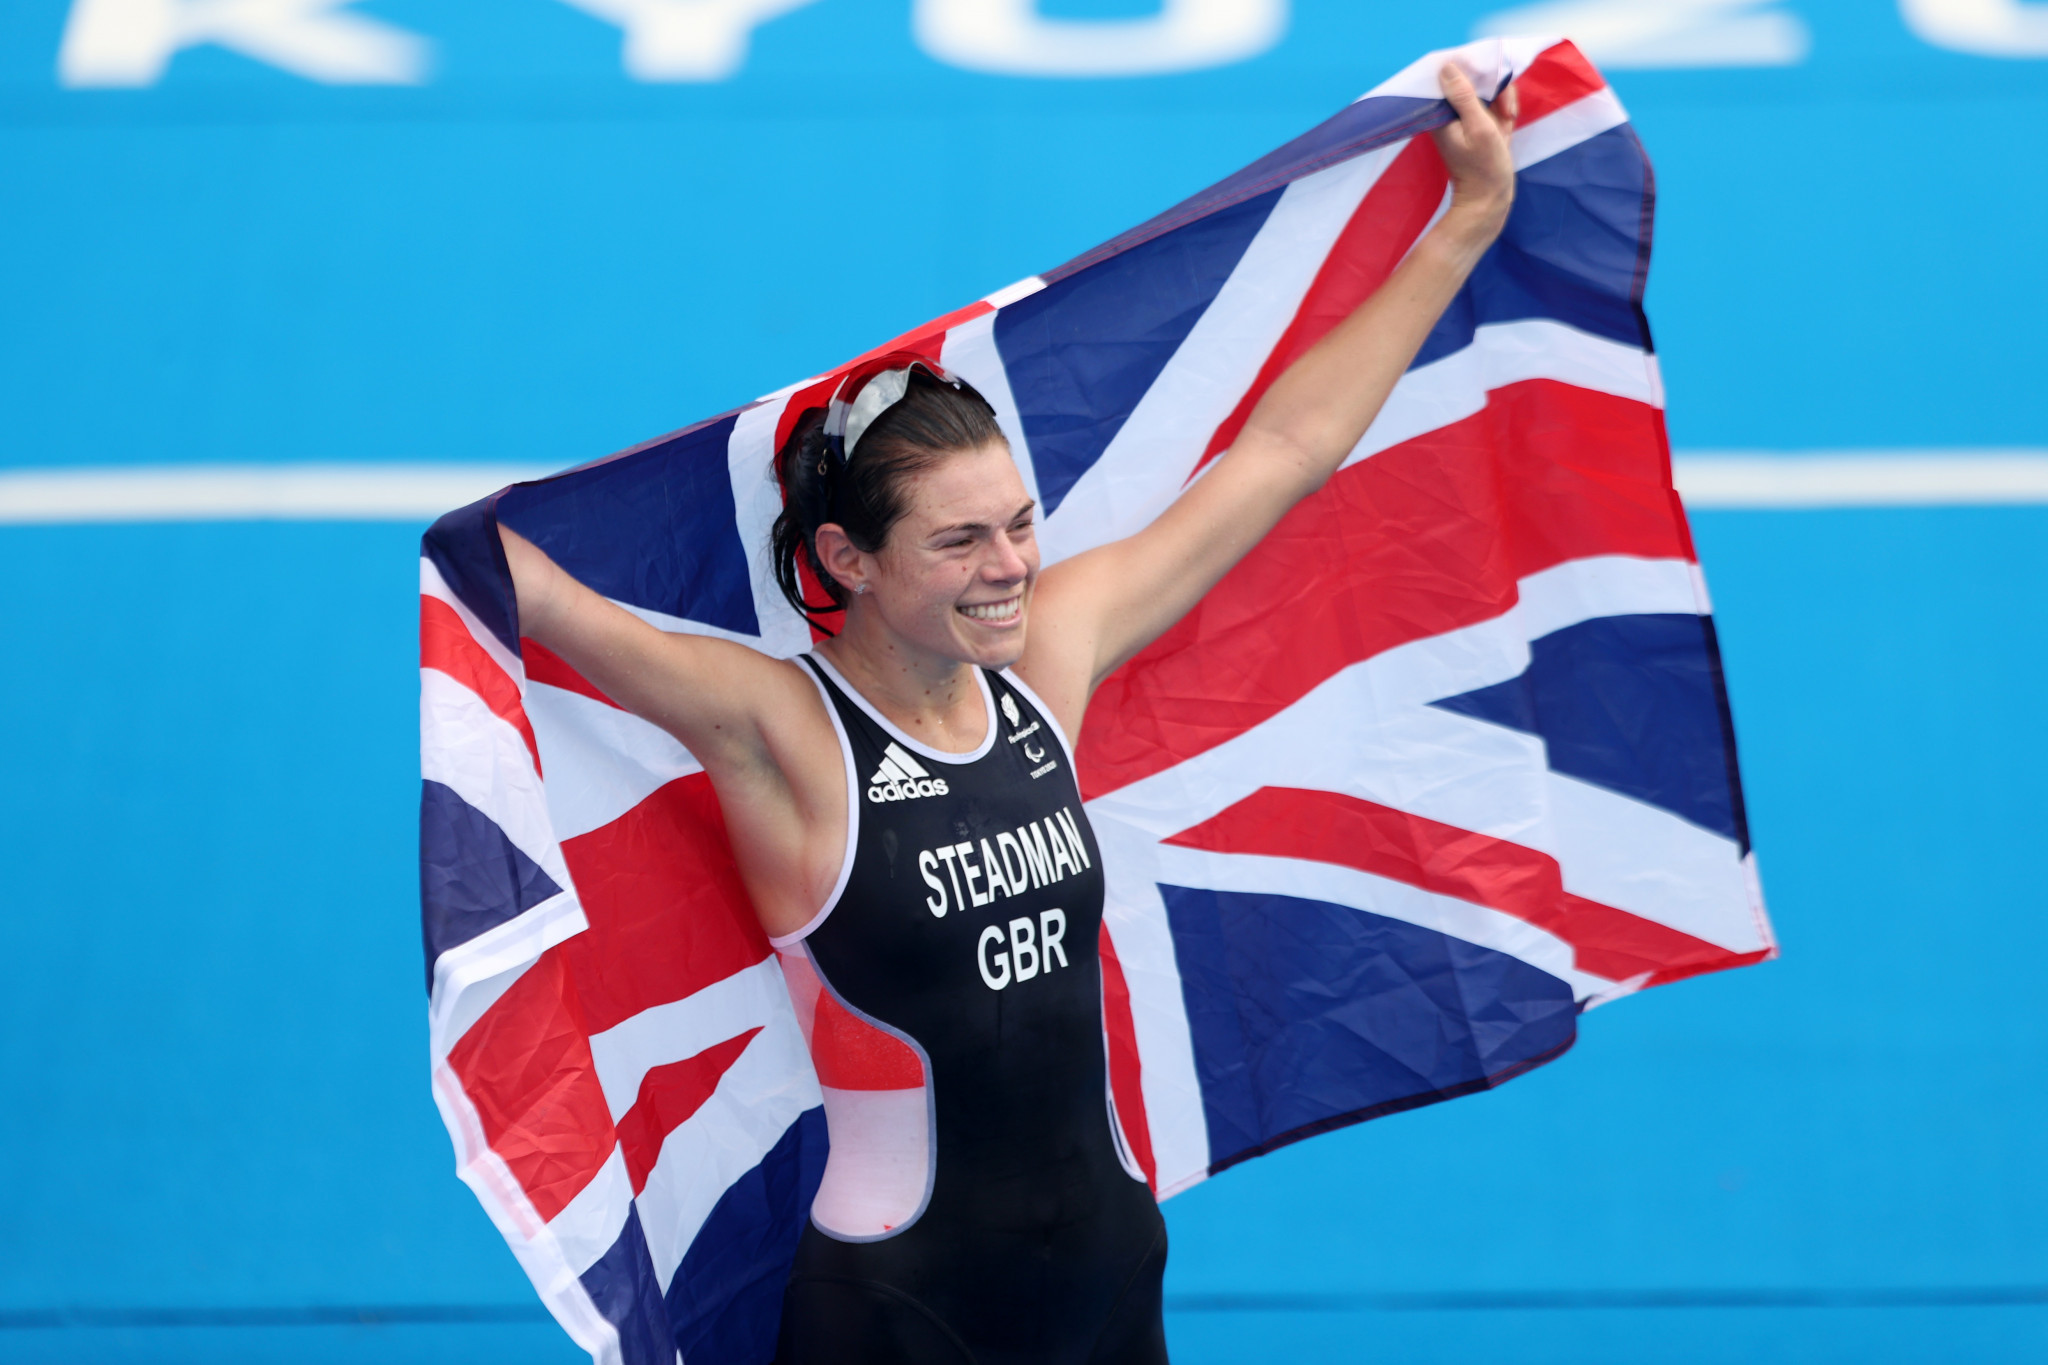 Laura Steadman won gold at Tokyo 2020 ©Getty Images